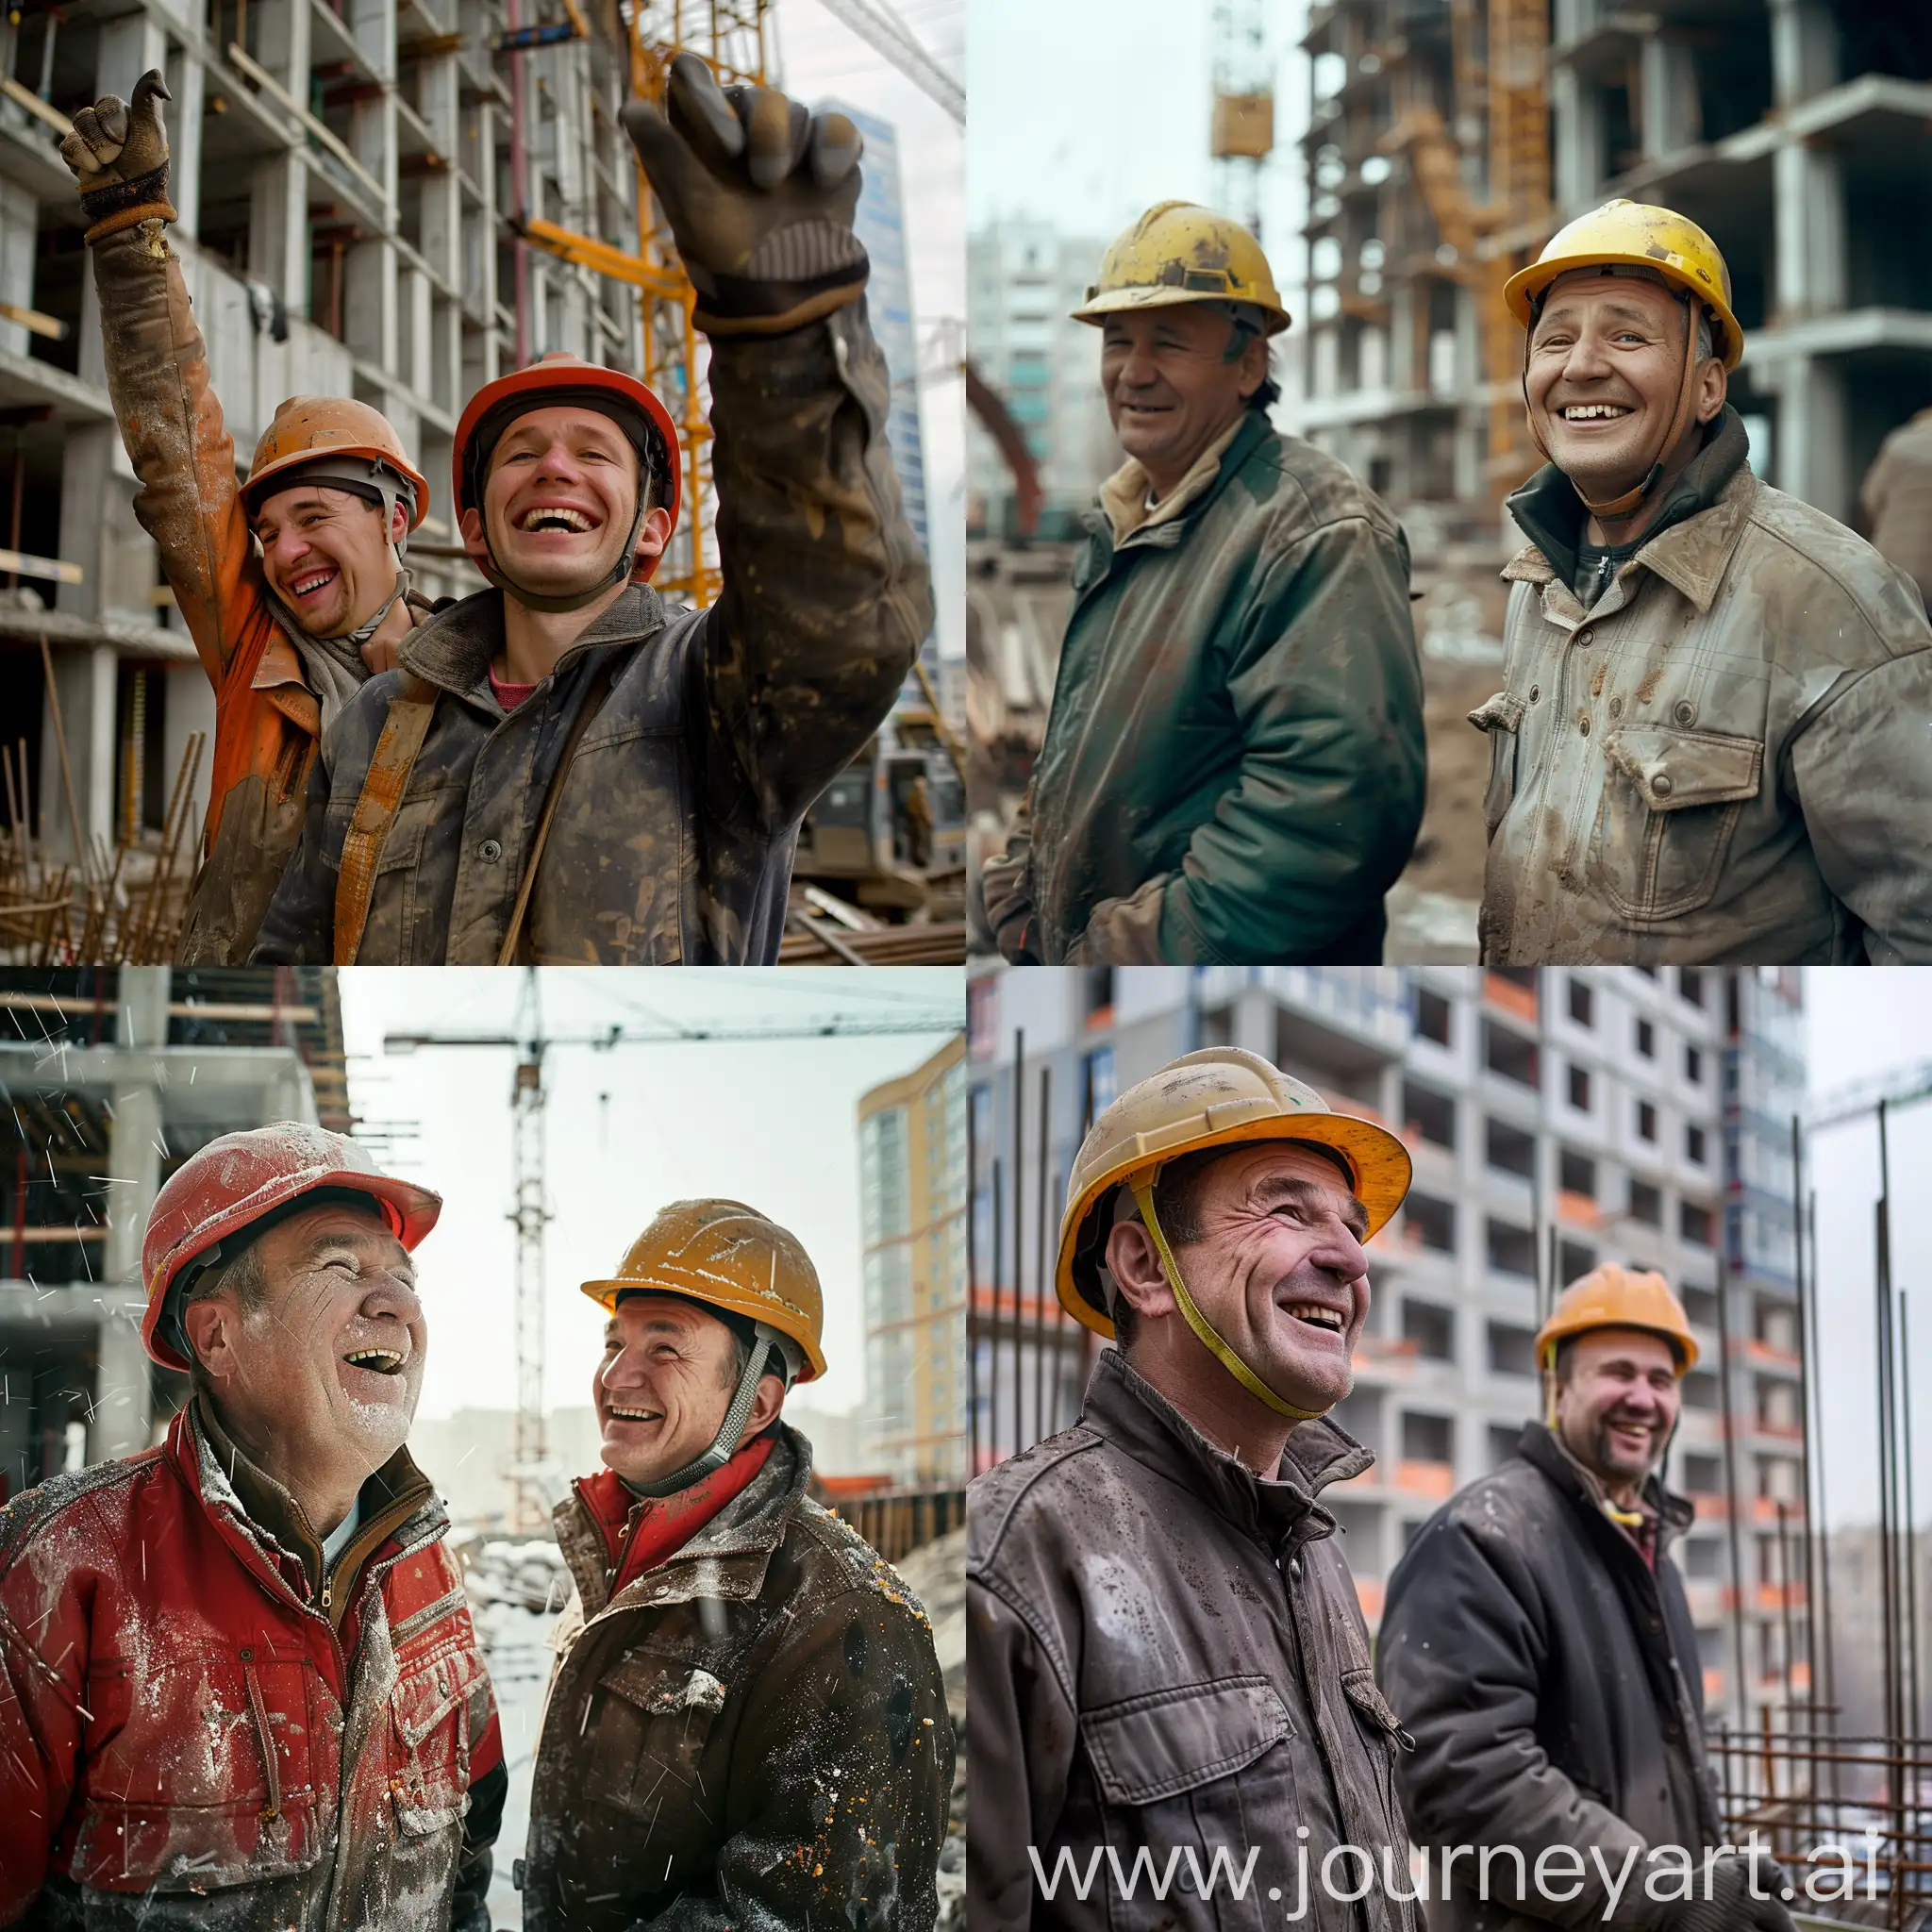 create a real photo in the best quality, which shows builders in helmets happy at a construction site in Russia